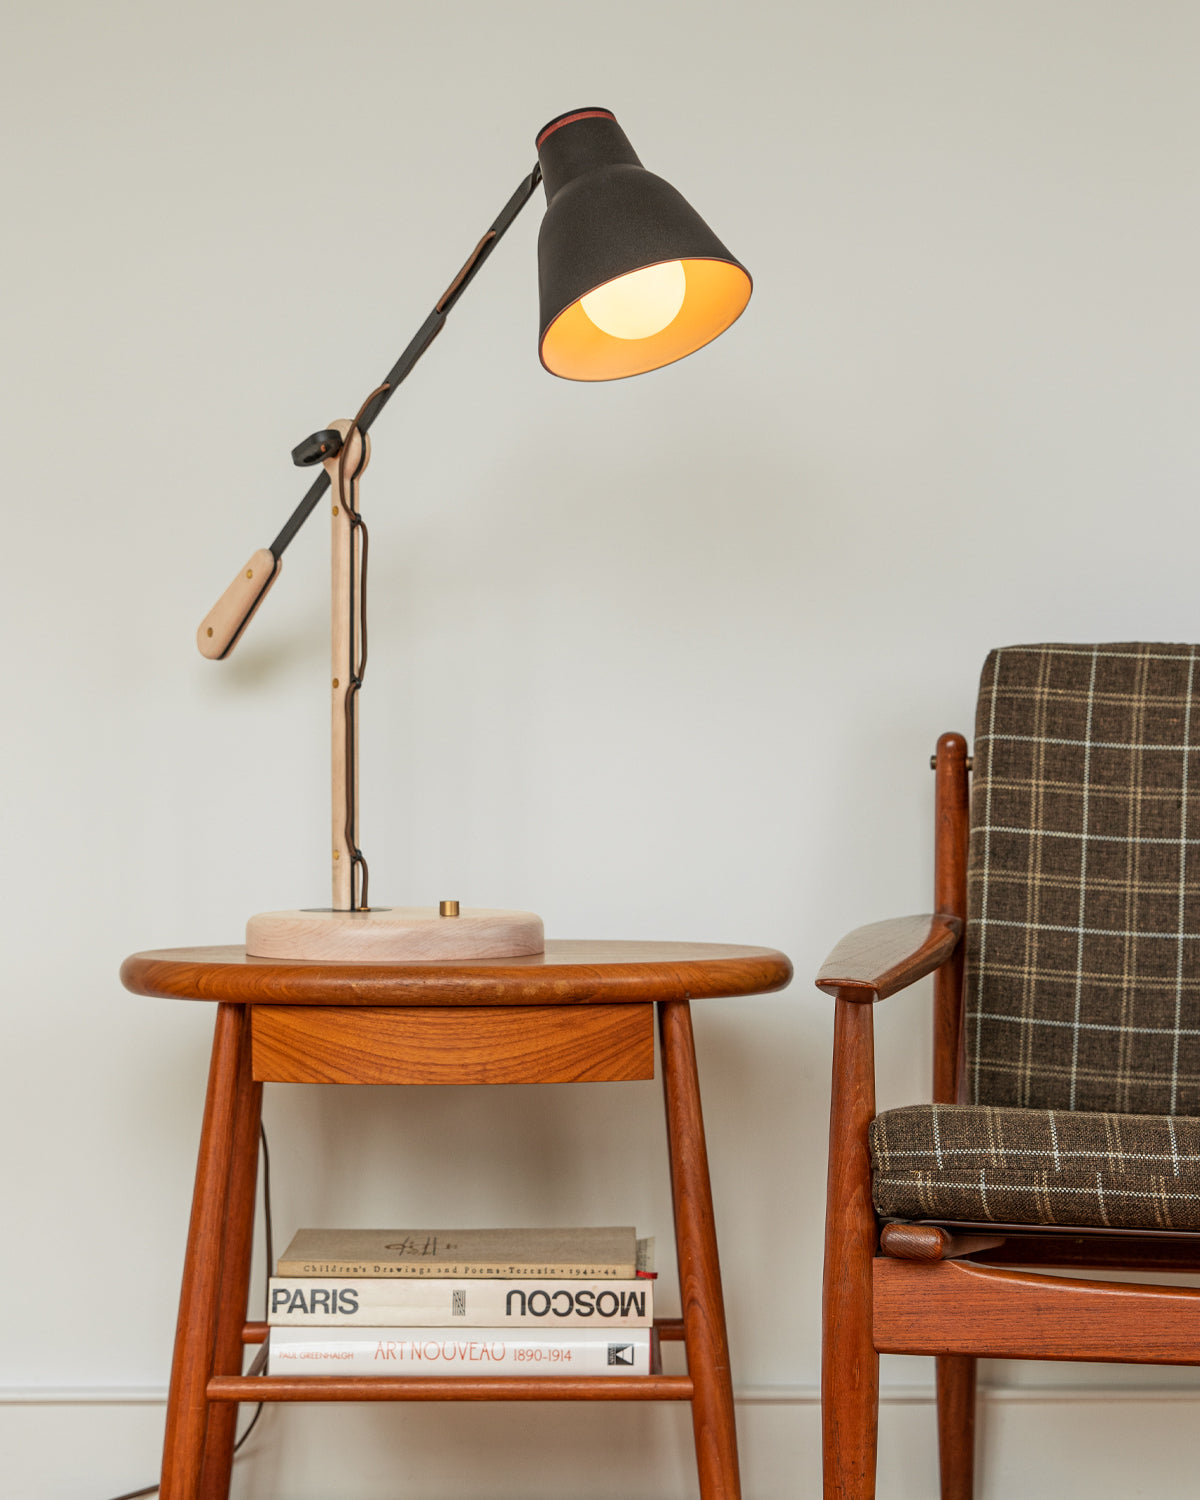 Maple, steel and ceramic desk side table lamp with articulating arm